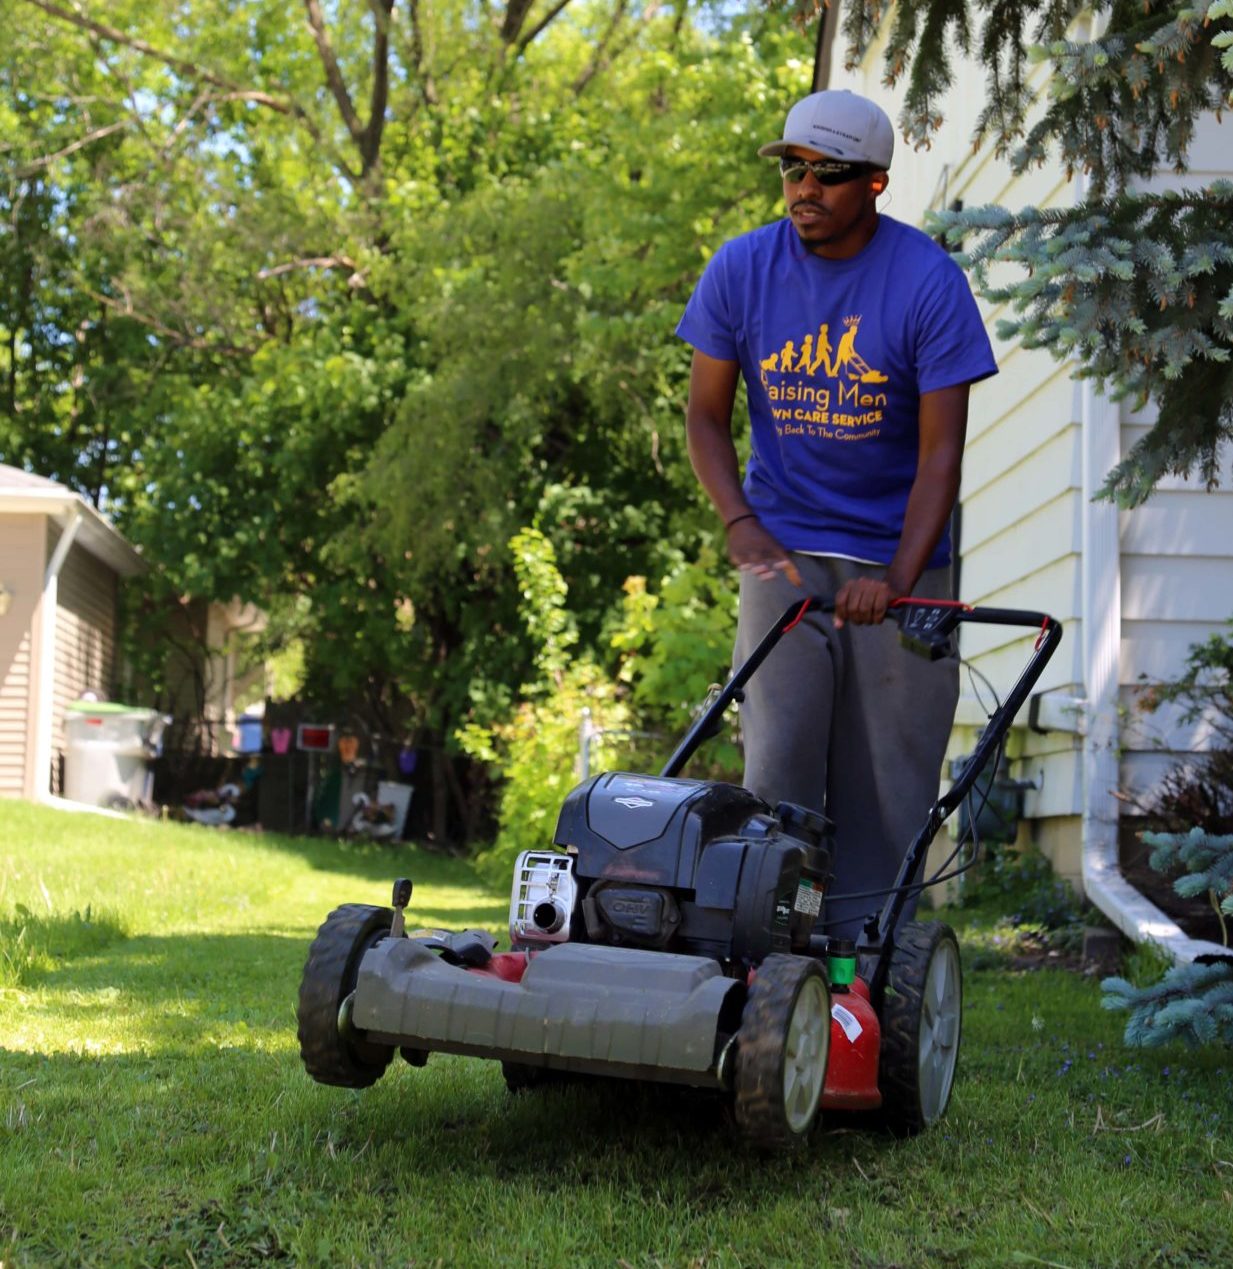 A man with a lawnmower wearing a custom t-shirt.